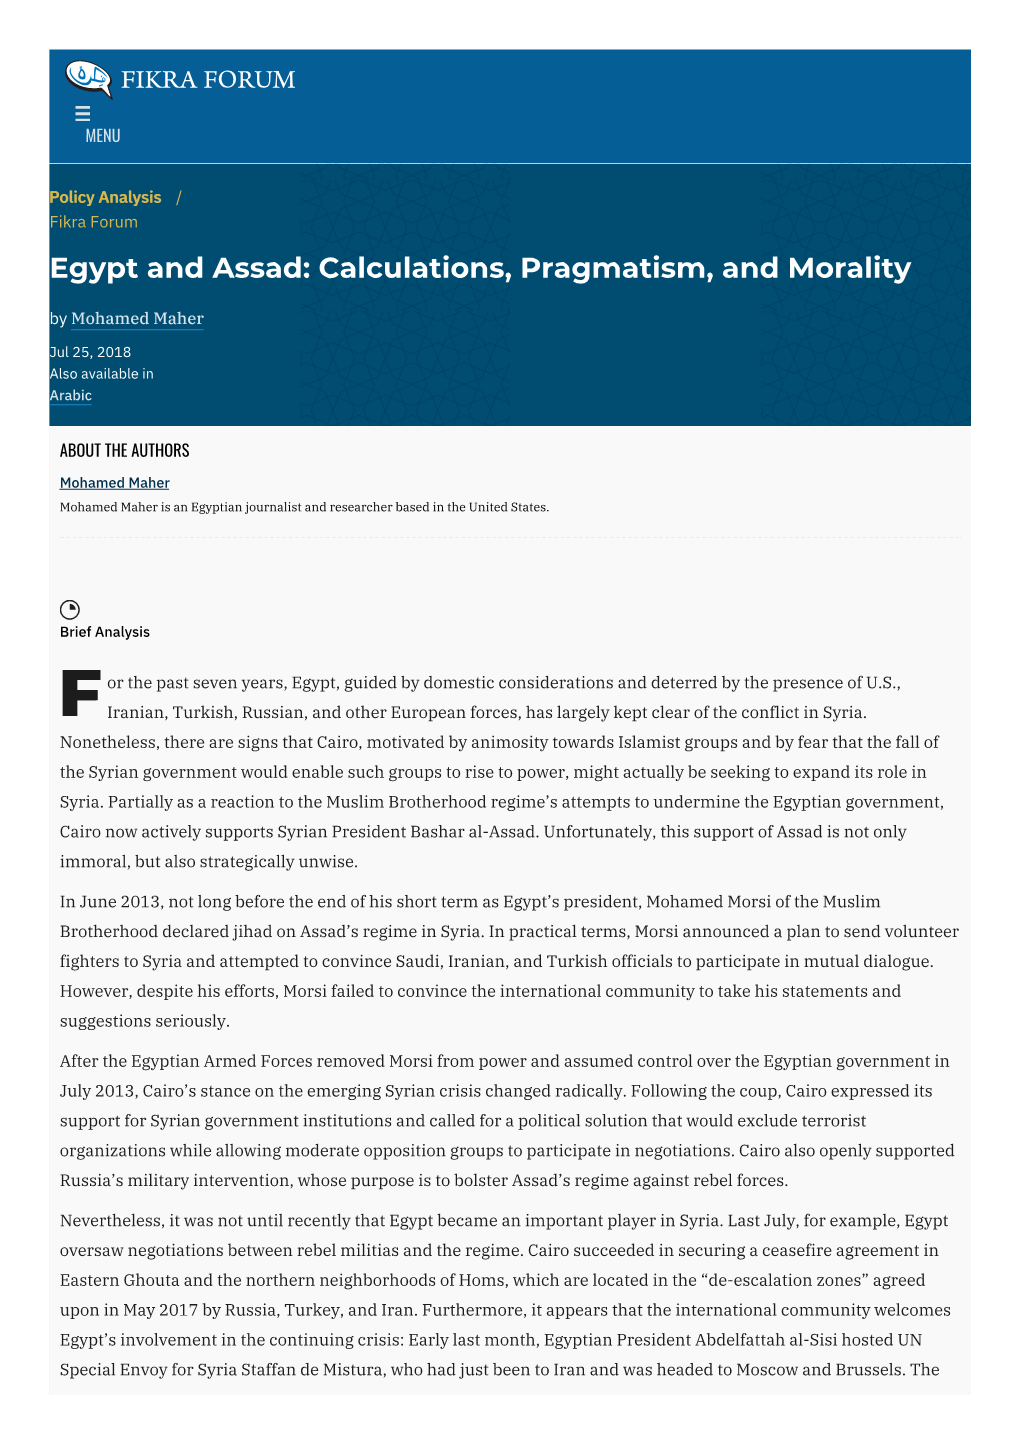 Egypt and Assad: Calculations, Pragmatism, and Morality by Mohamed Maher